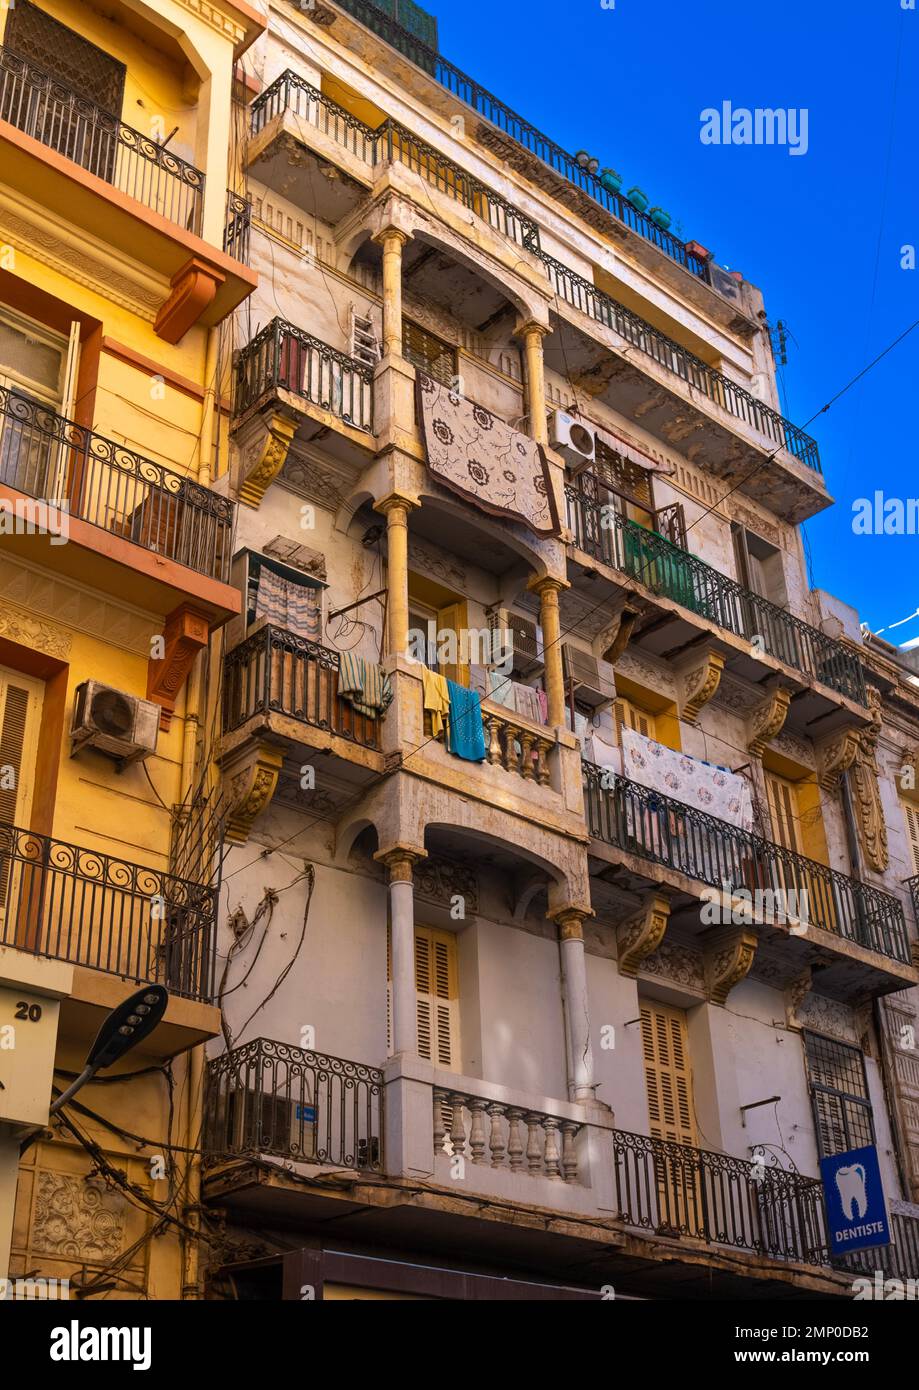 Old french colonial building, North Africa, Oran, Algeria Stock Photo